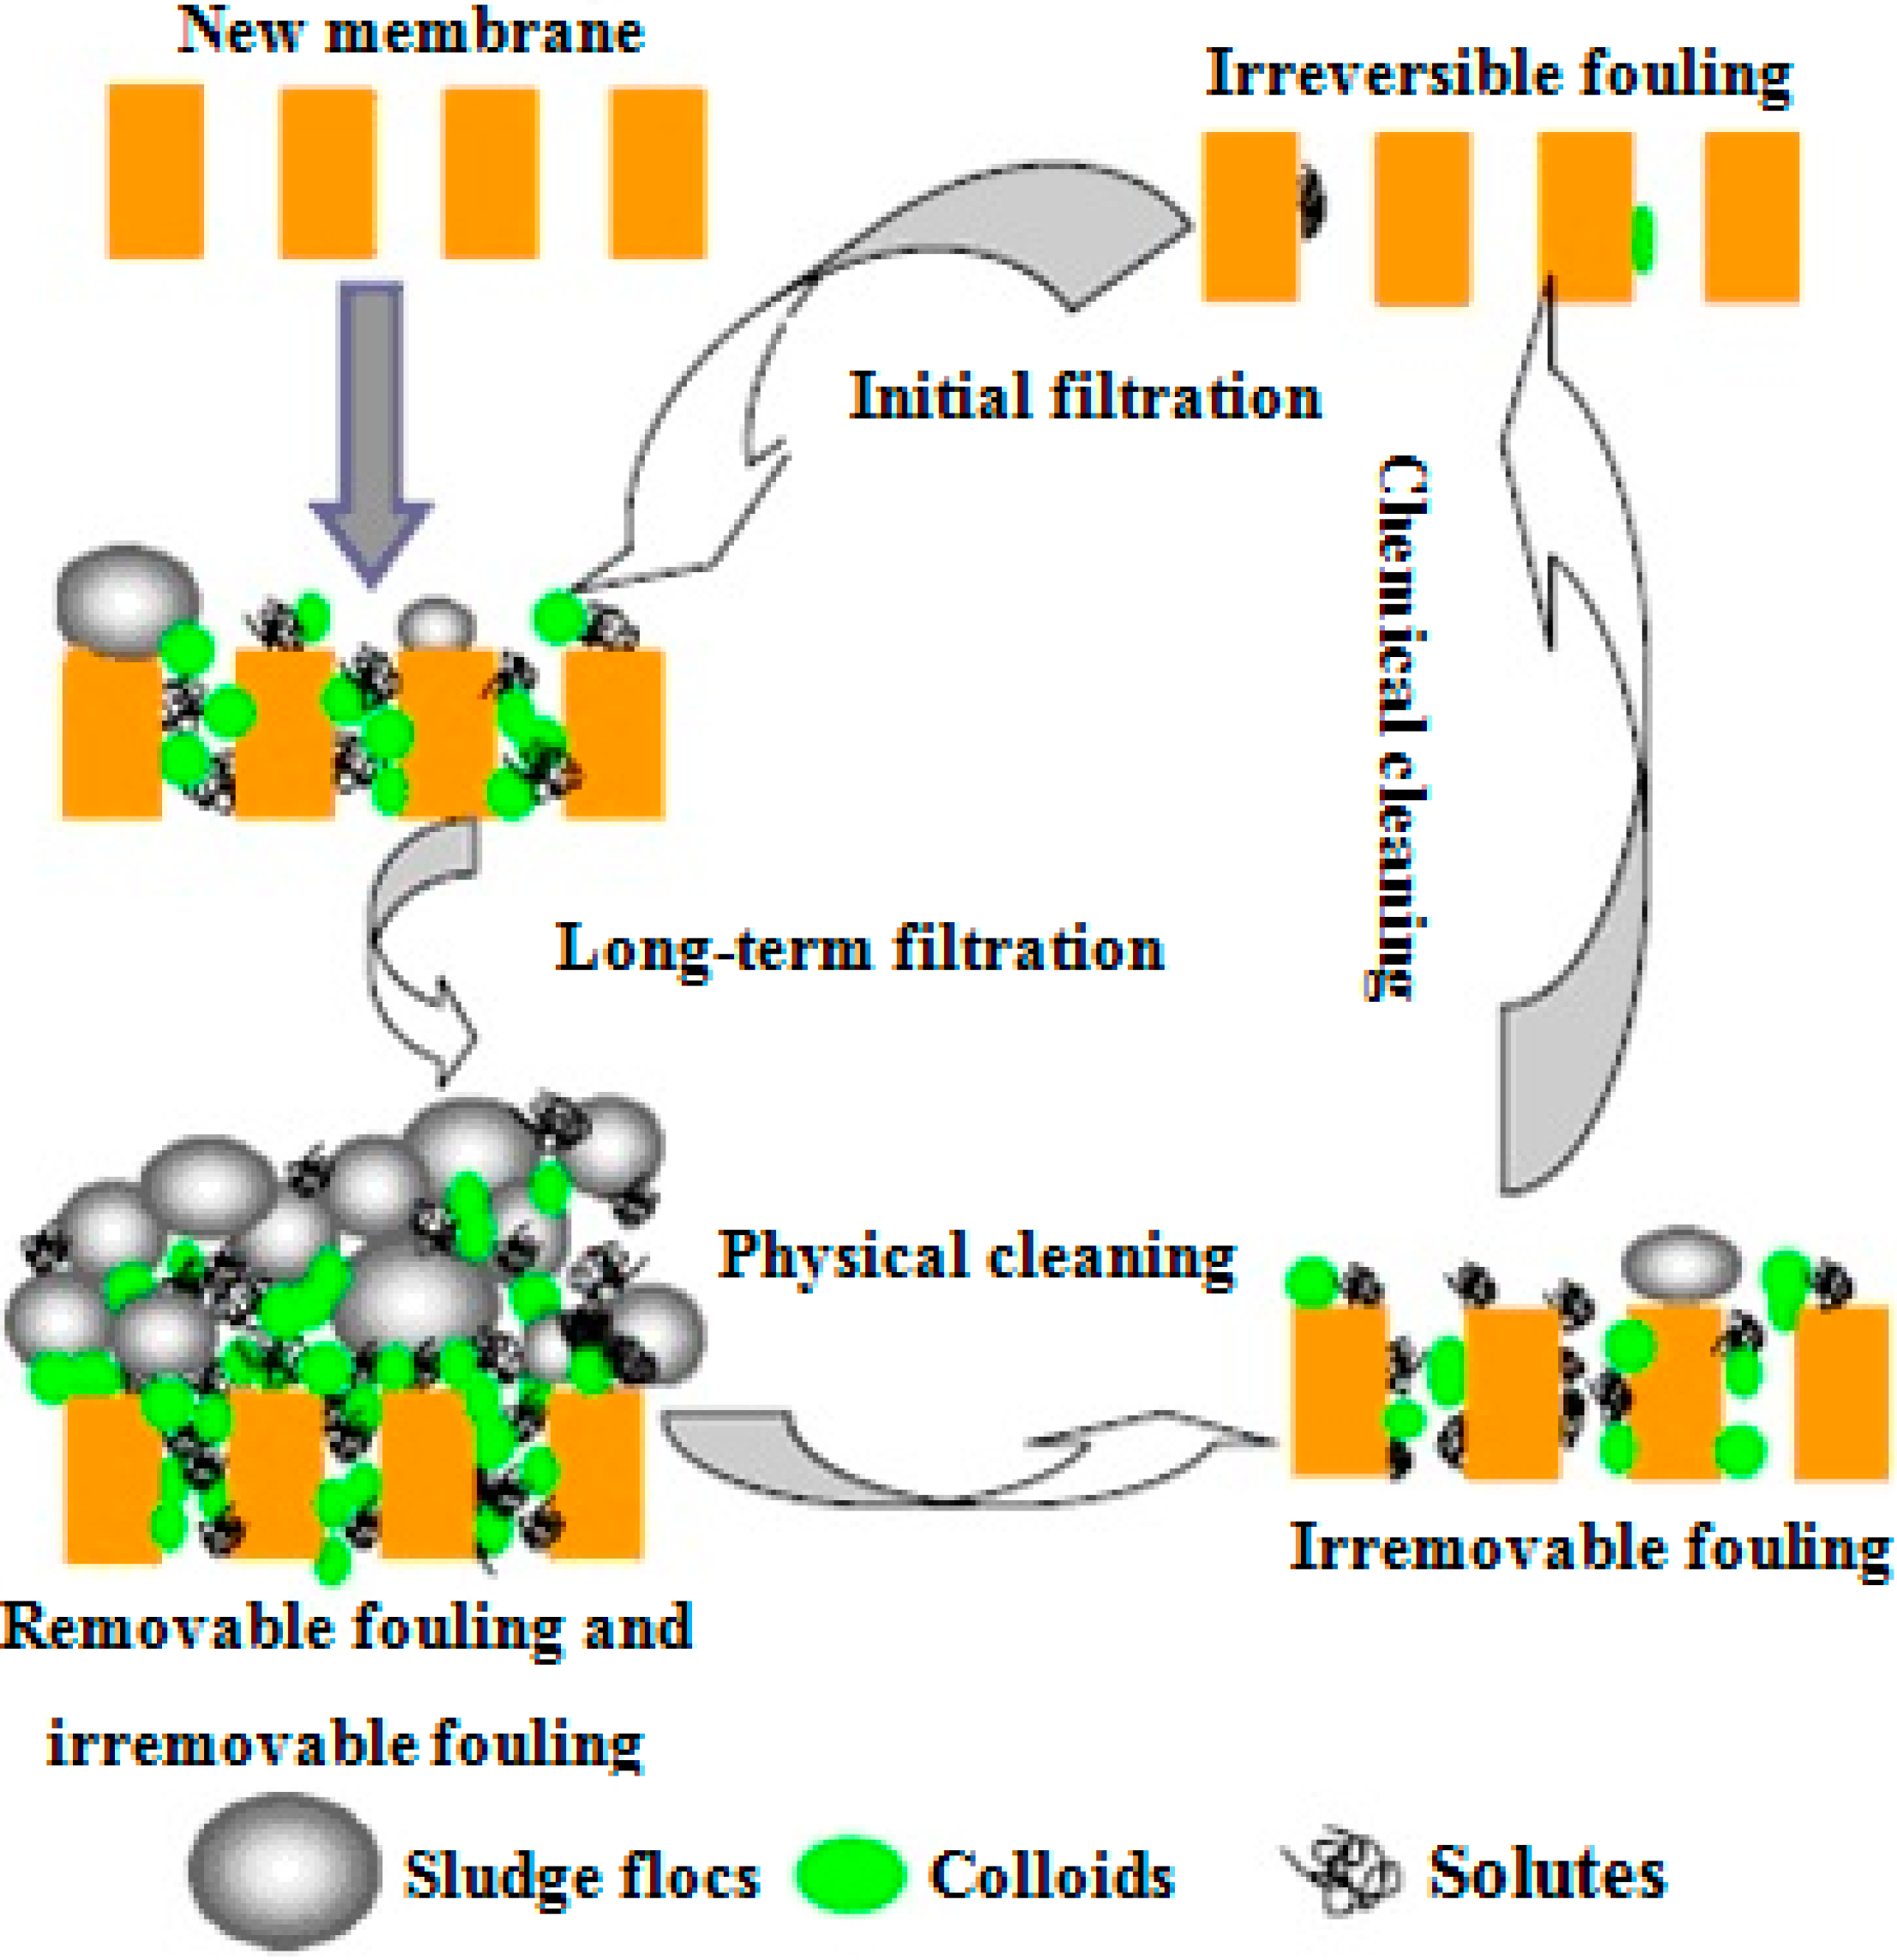 Processes | Free Full-Text | Fouling Issues in Membrane Bioreactors (MBRs)  for Wastewater Treatment: Major Mechanisms, Prevention and Control  Strategies | HTML